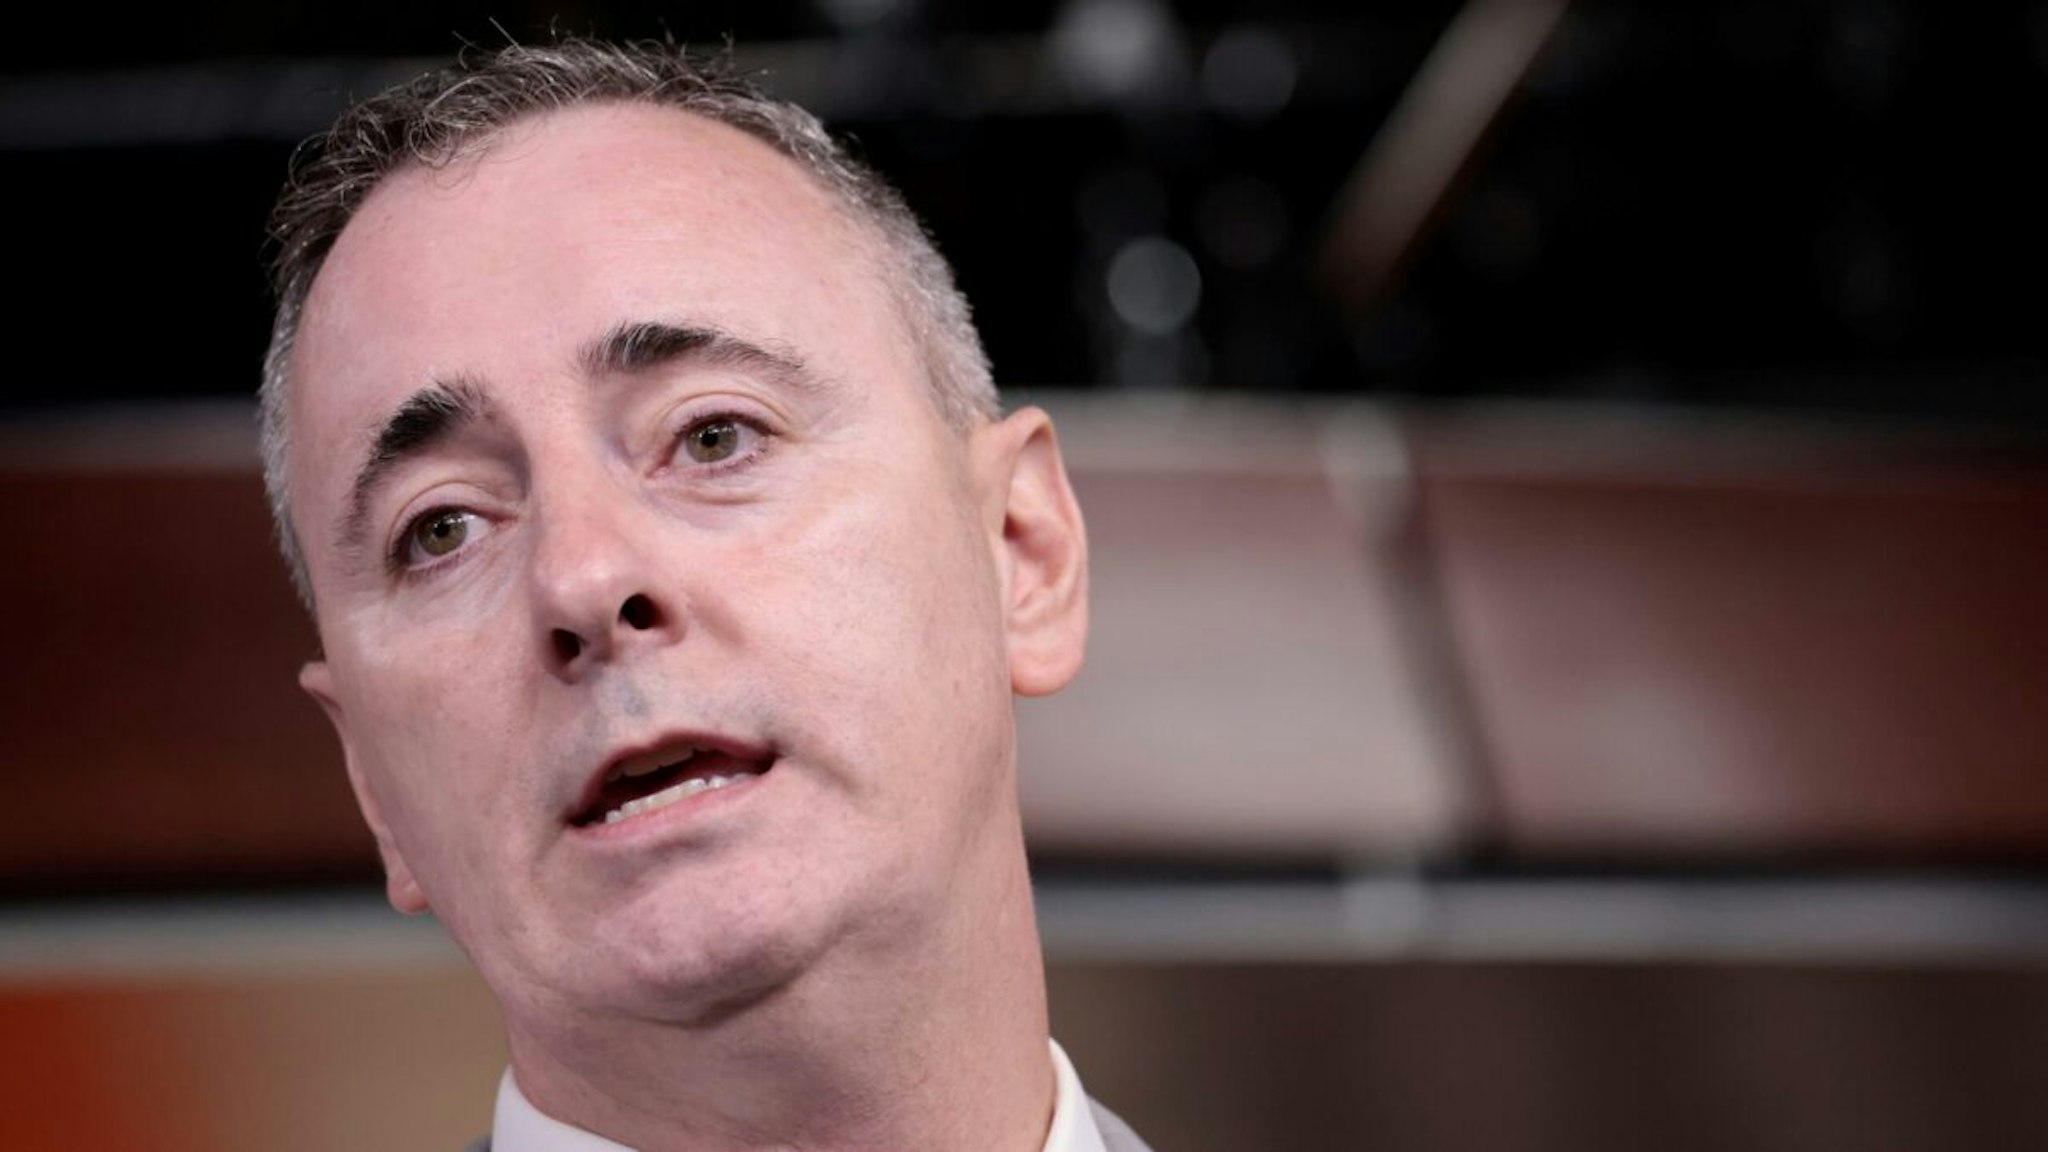 Representative Brian Fitzpatrick, a Republican from Pennsylvania, speaks during a news conference on recent actions of the FBI at the US Capitol in Washington, D.C., US, on Friday, Aug. 12, 2022.